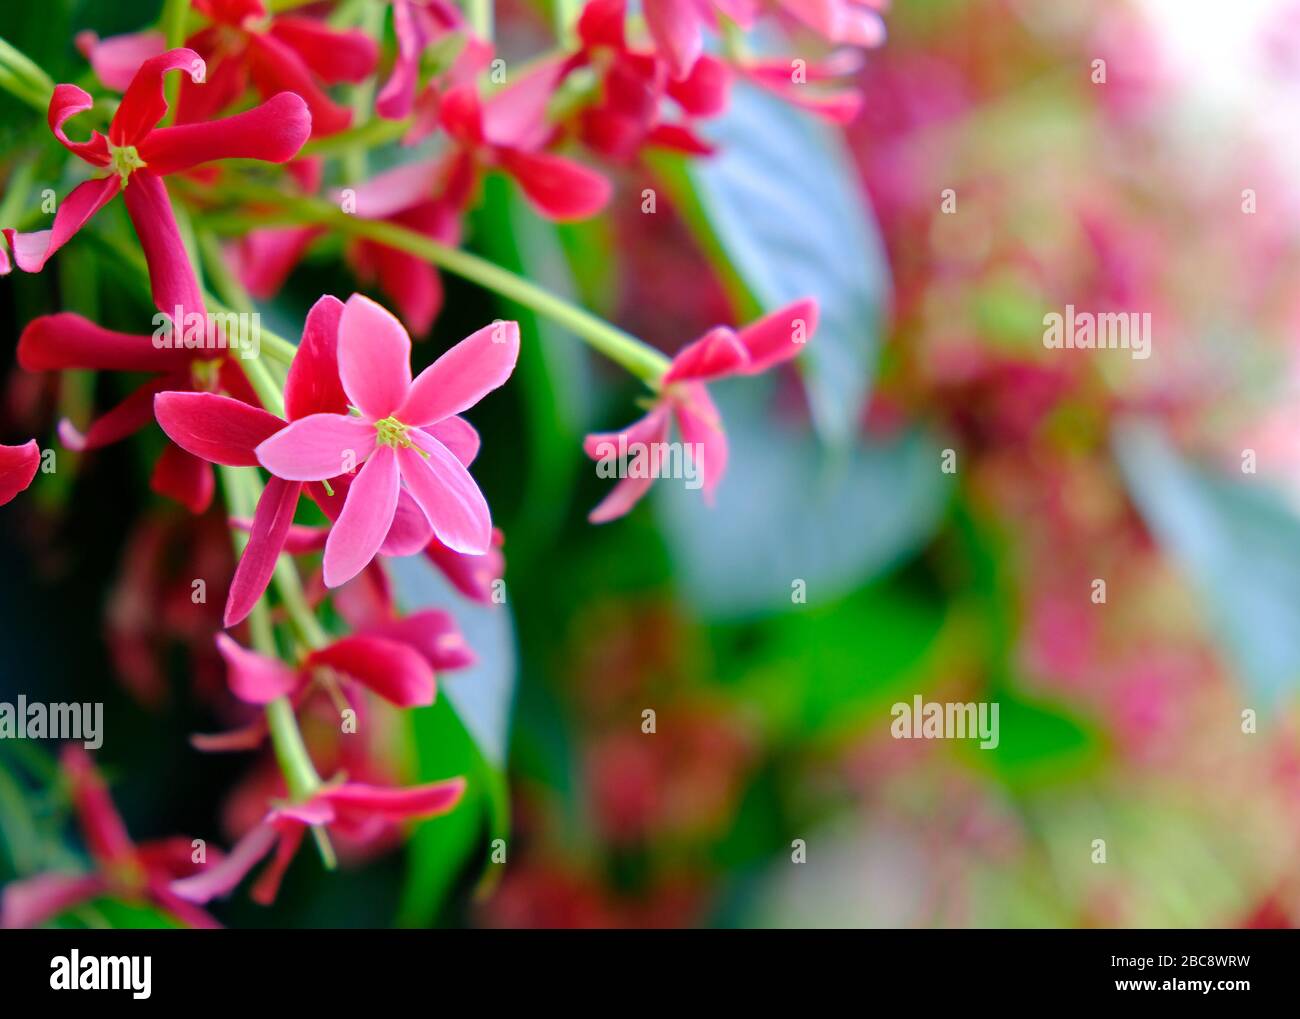 Lively pink flowers (Combretum indicum) on blurred green background, Chinese honeysuckle. Stock Photo